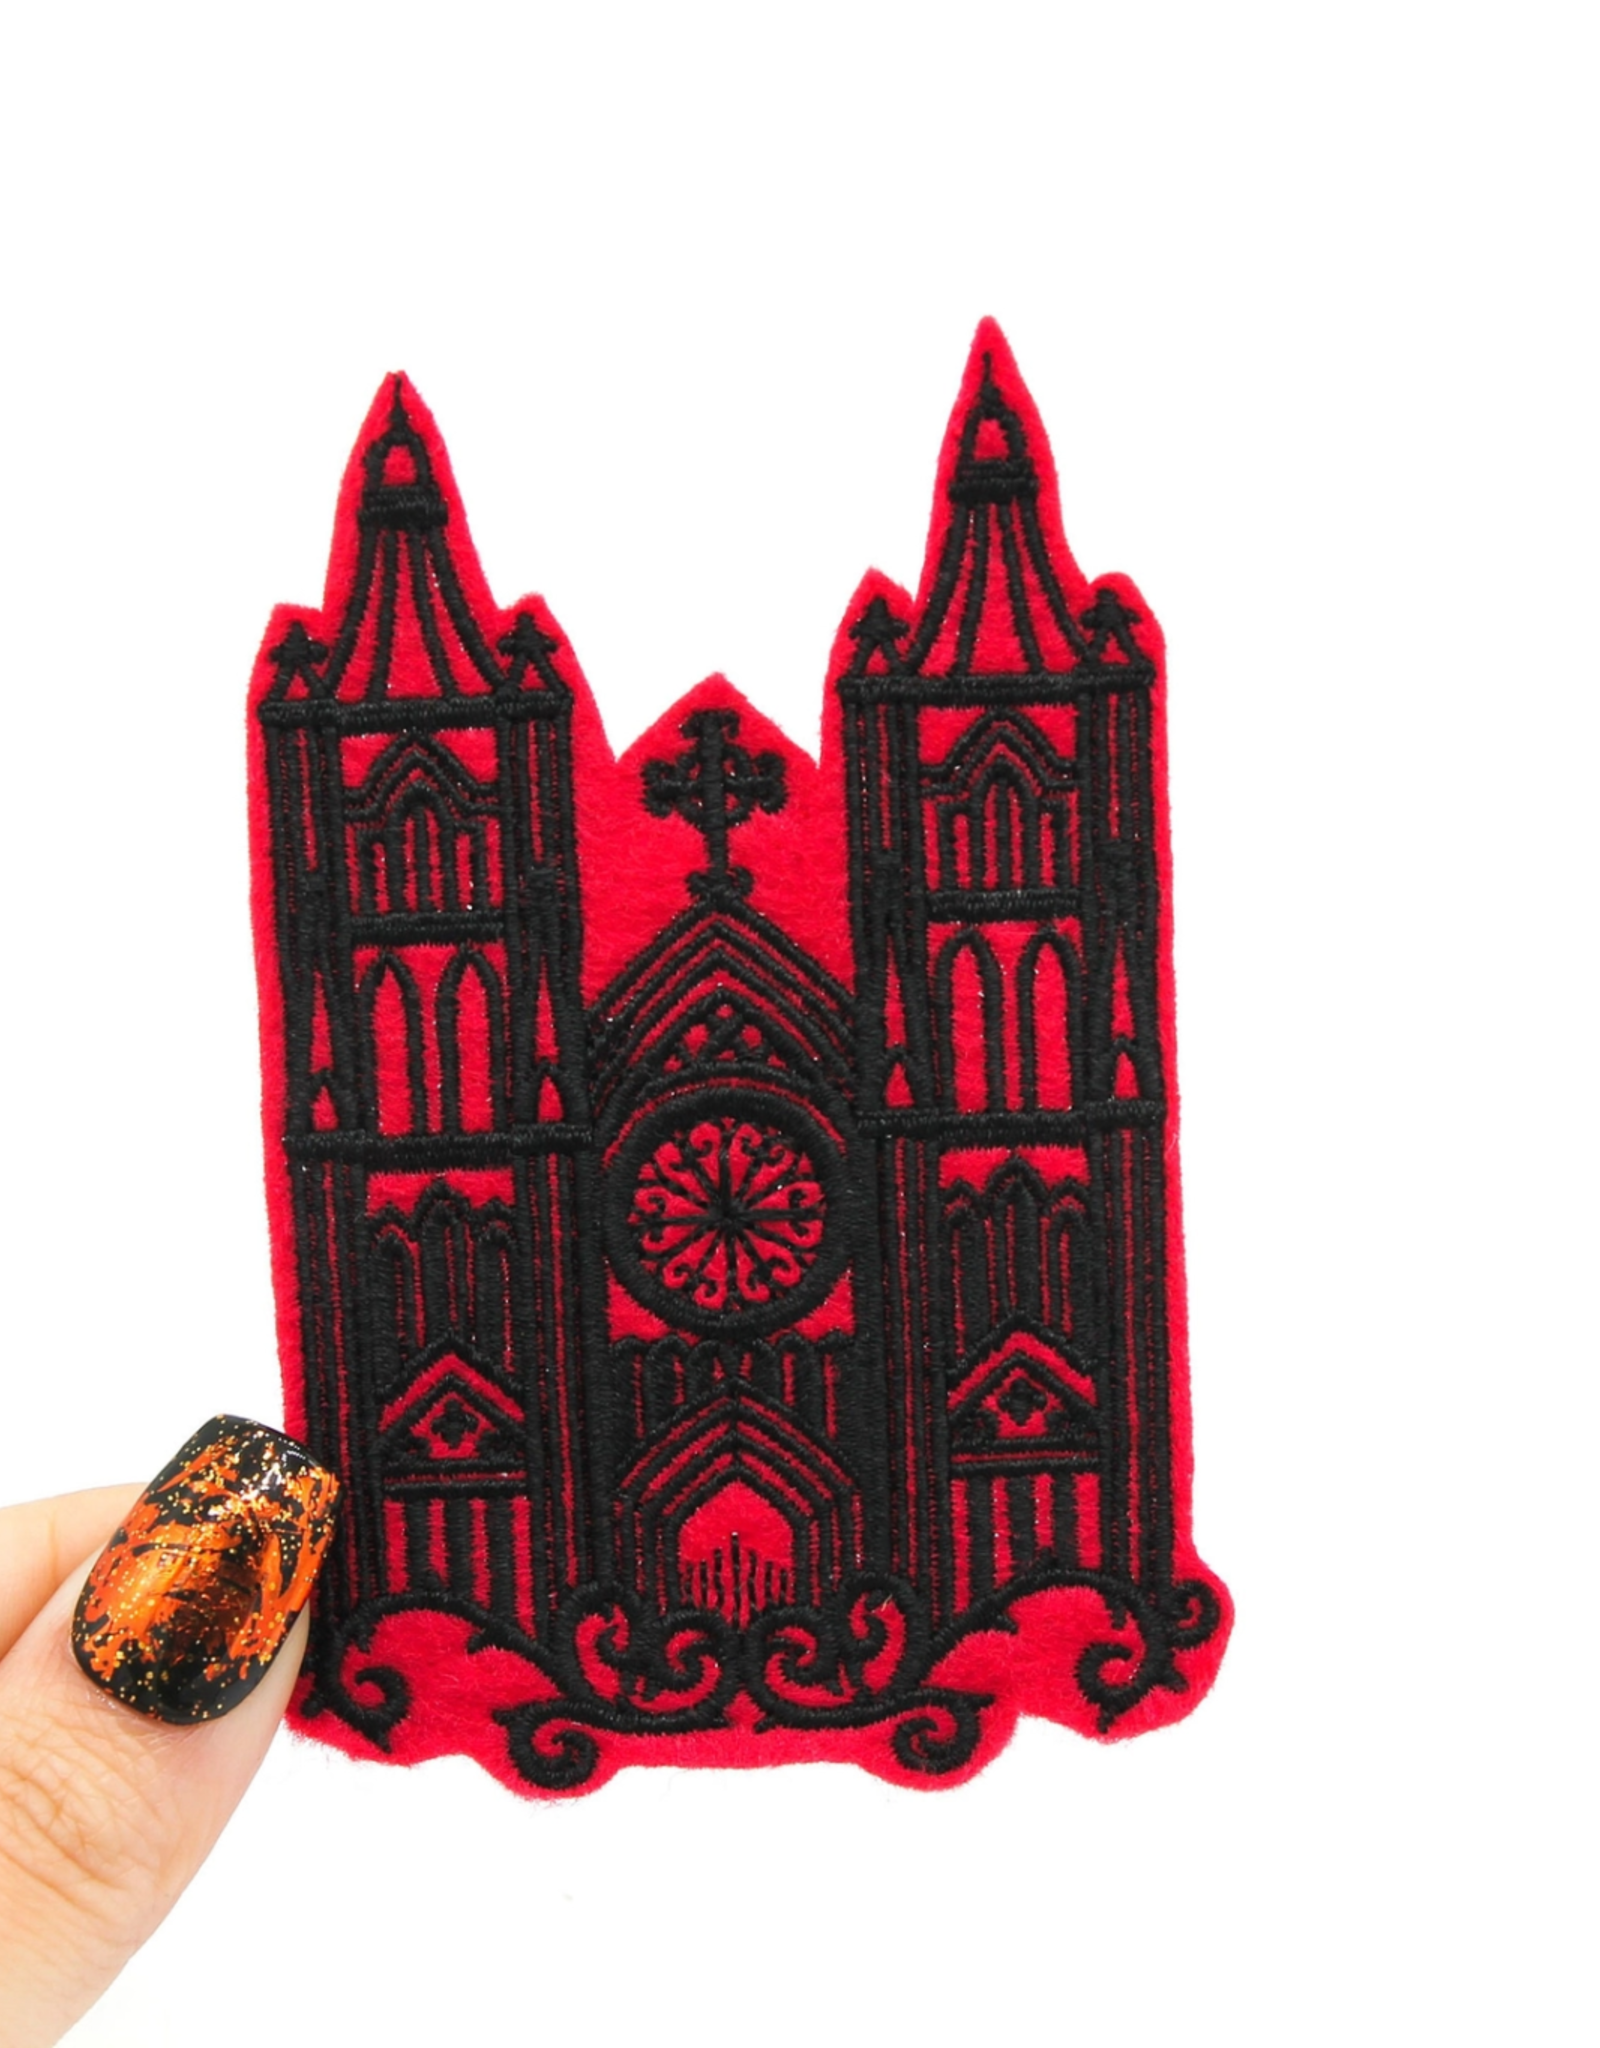 Gothic Cathedral Red and Black Embroidered Iron On Patch